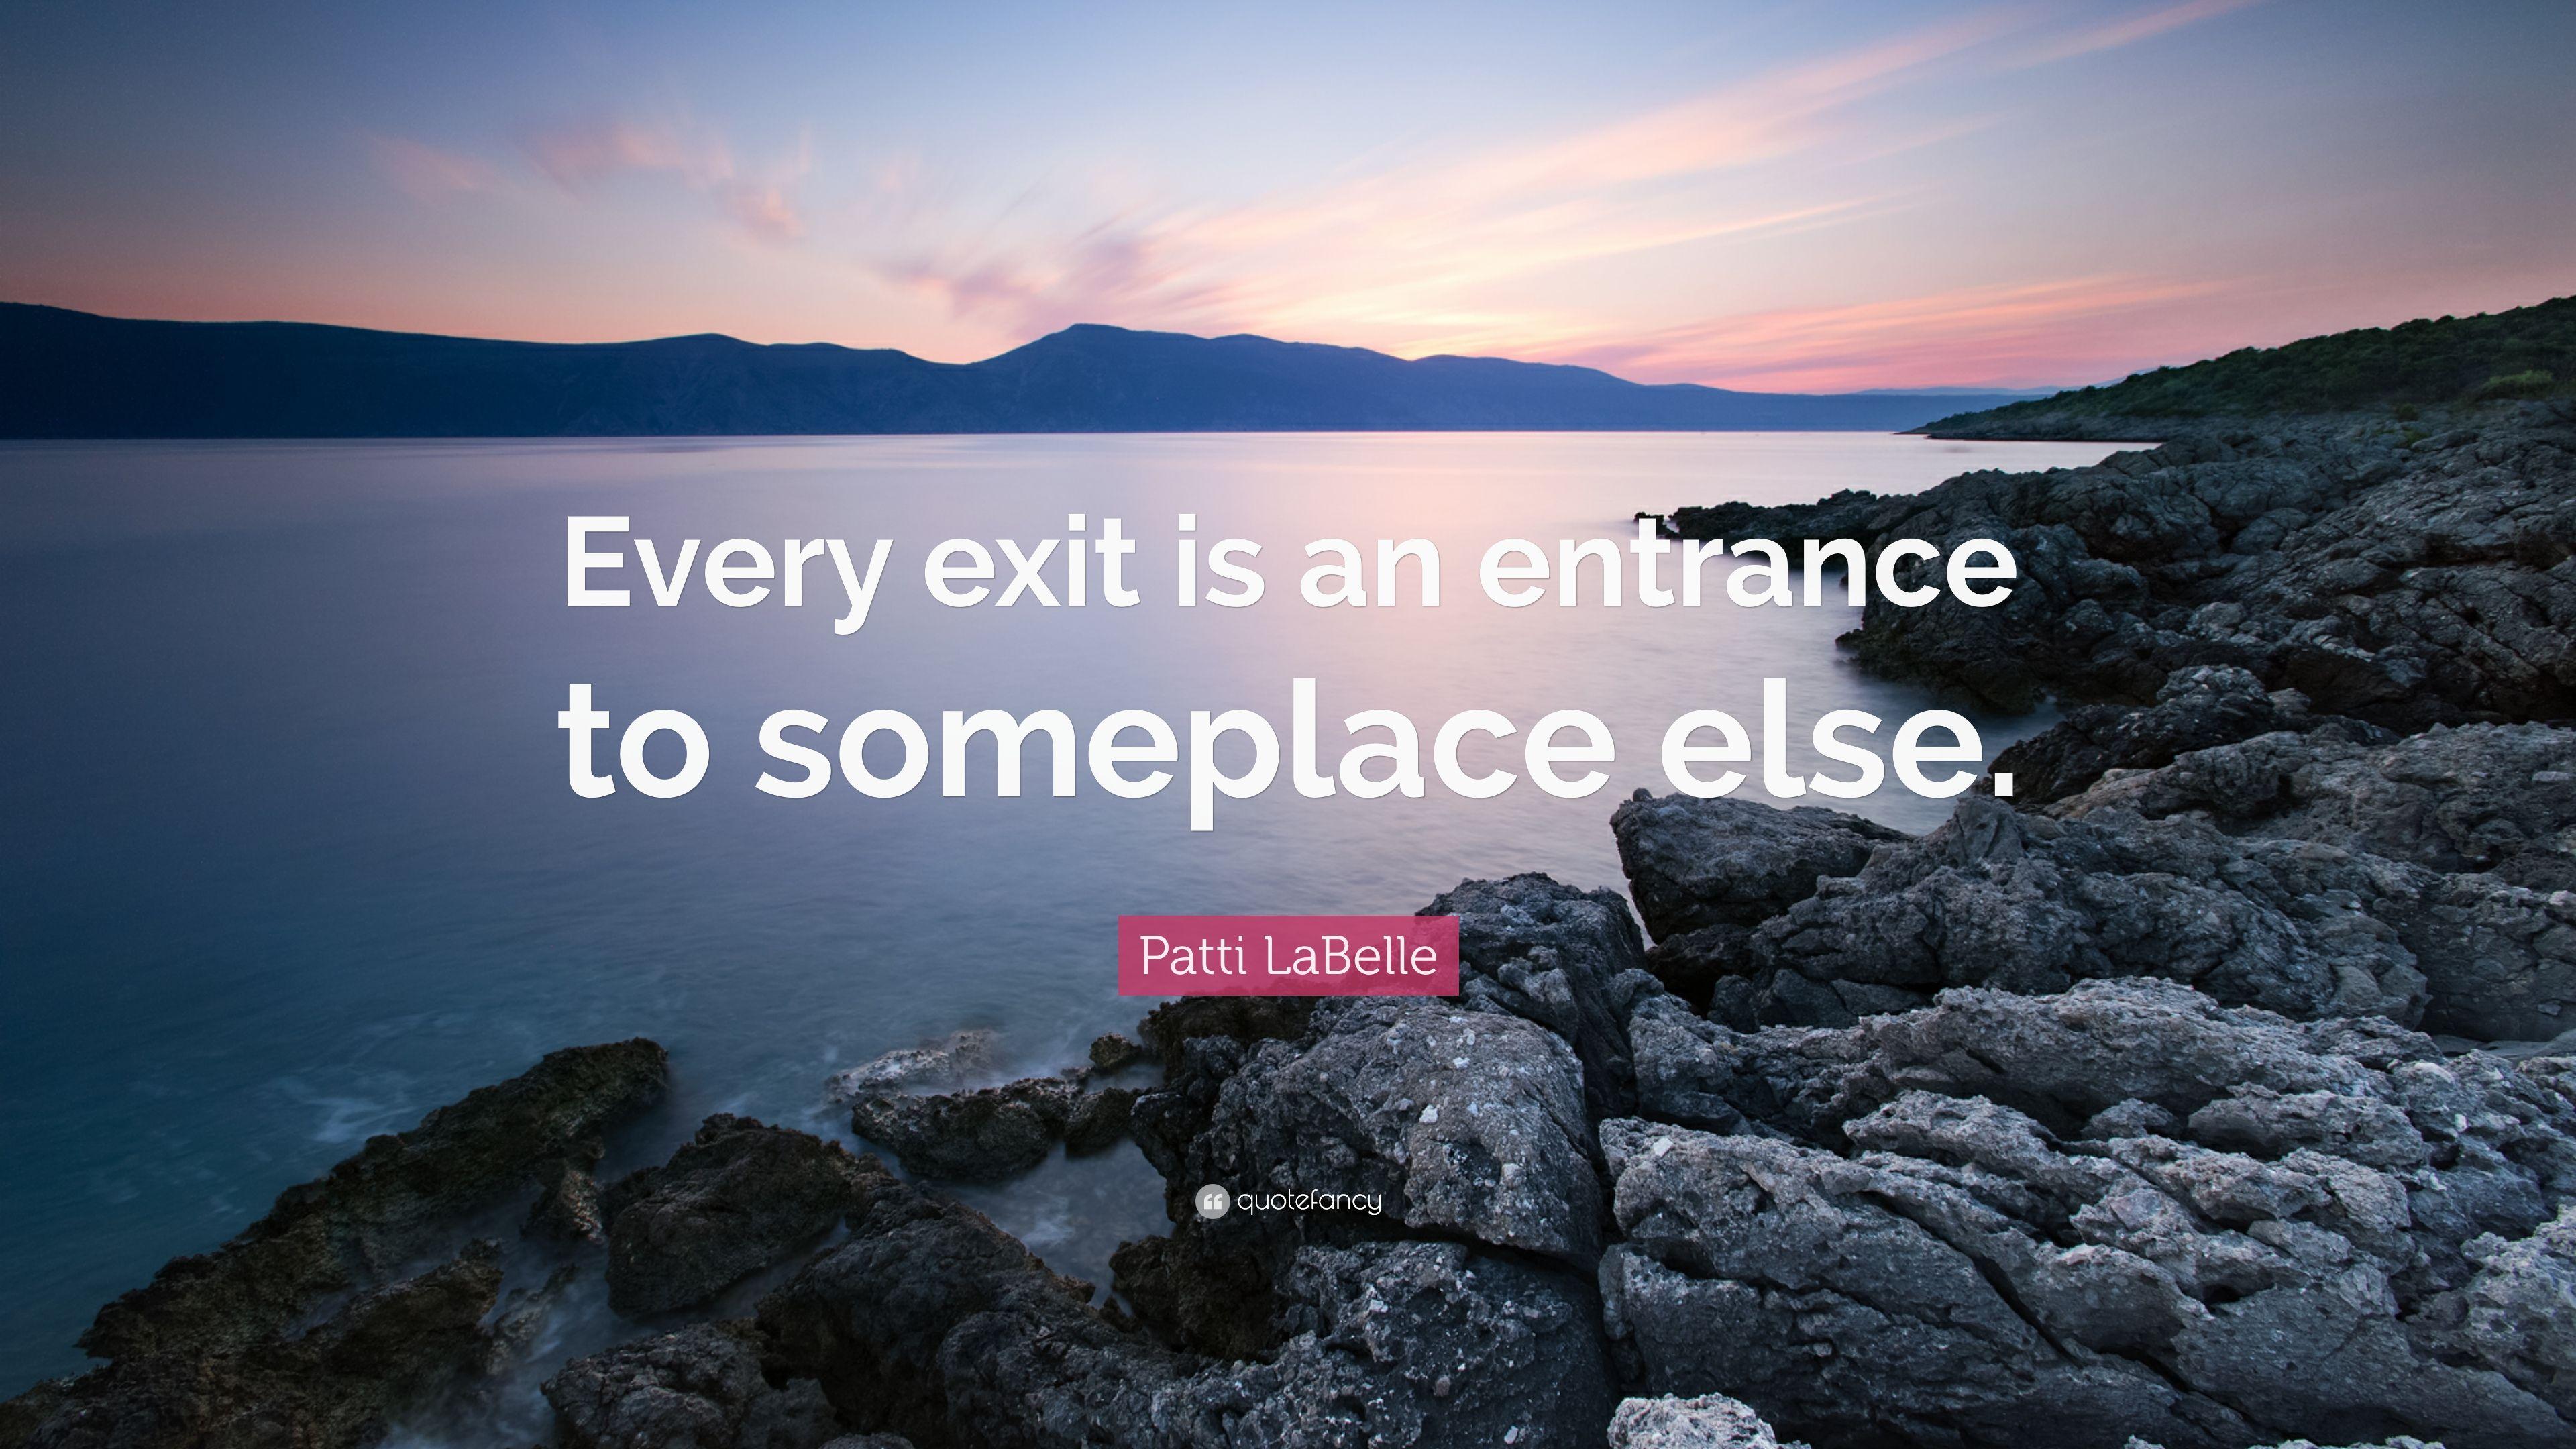 Patti LaBelle Quote: “Every exit is an entrance to someplace else